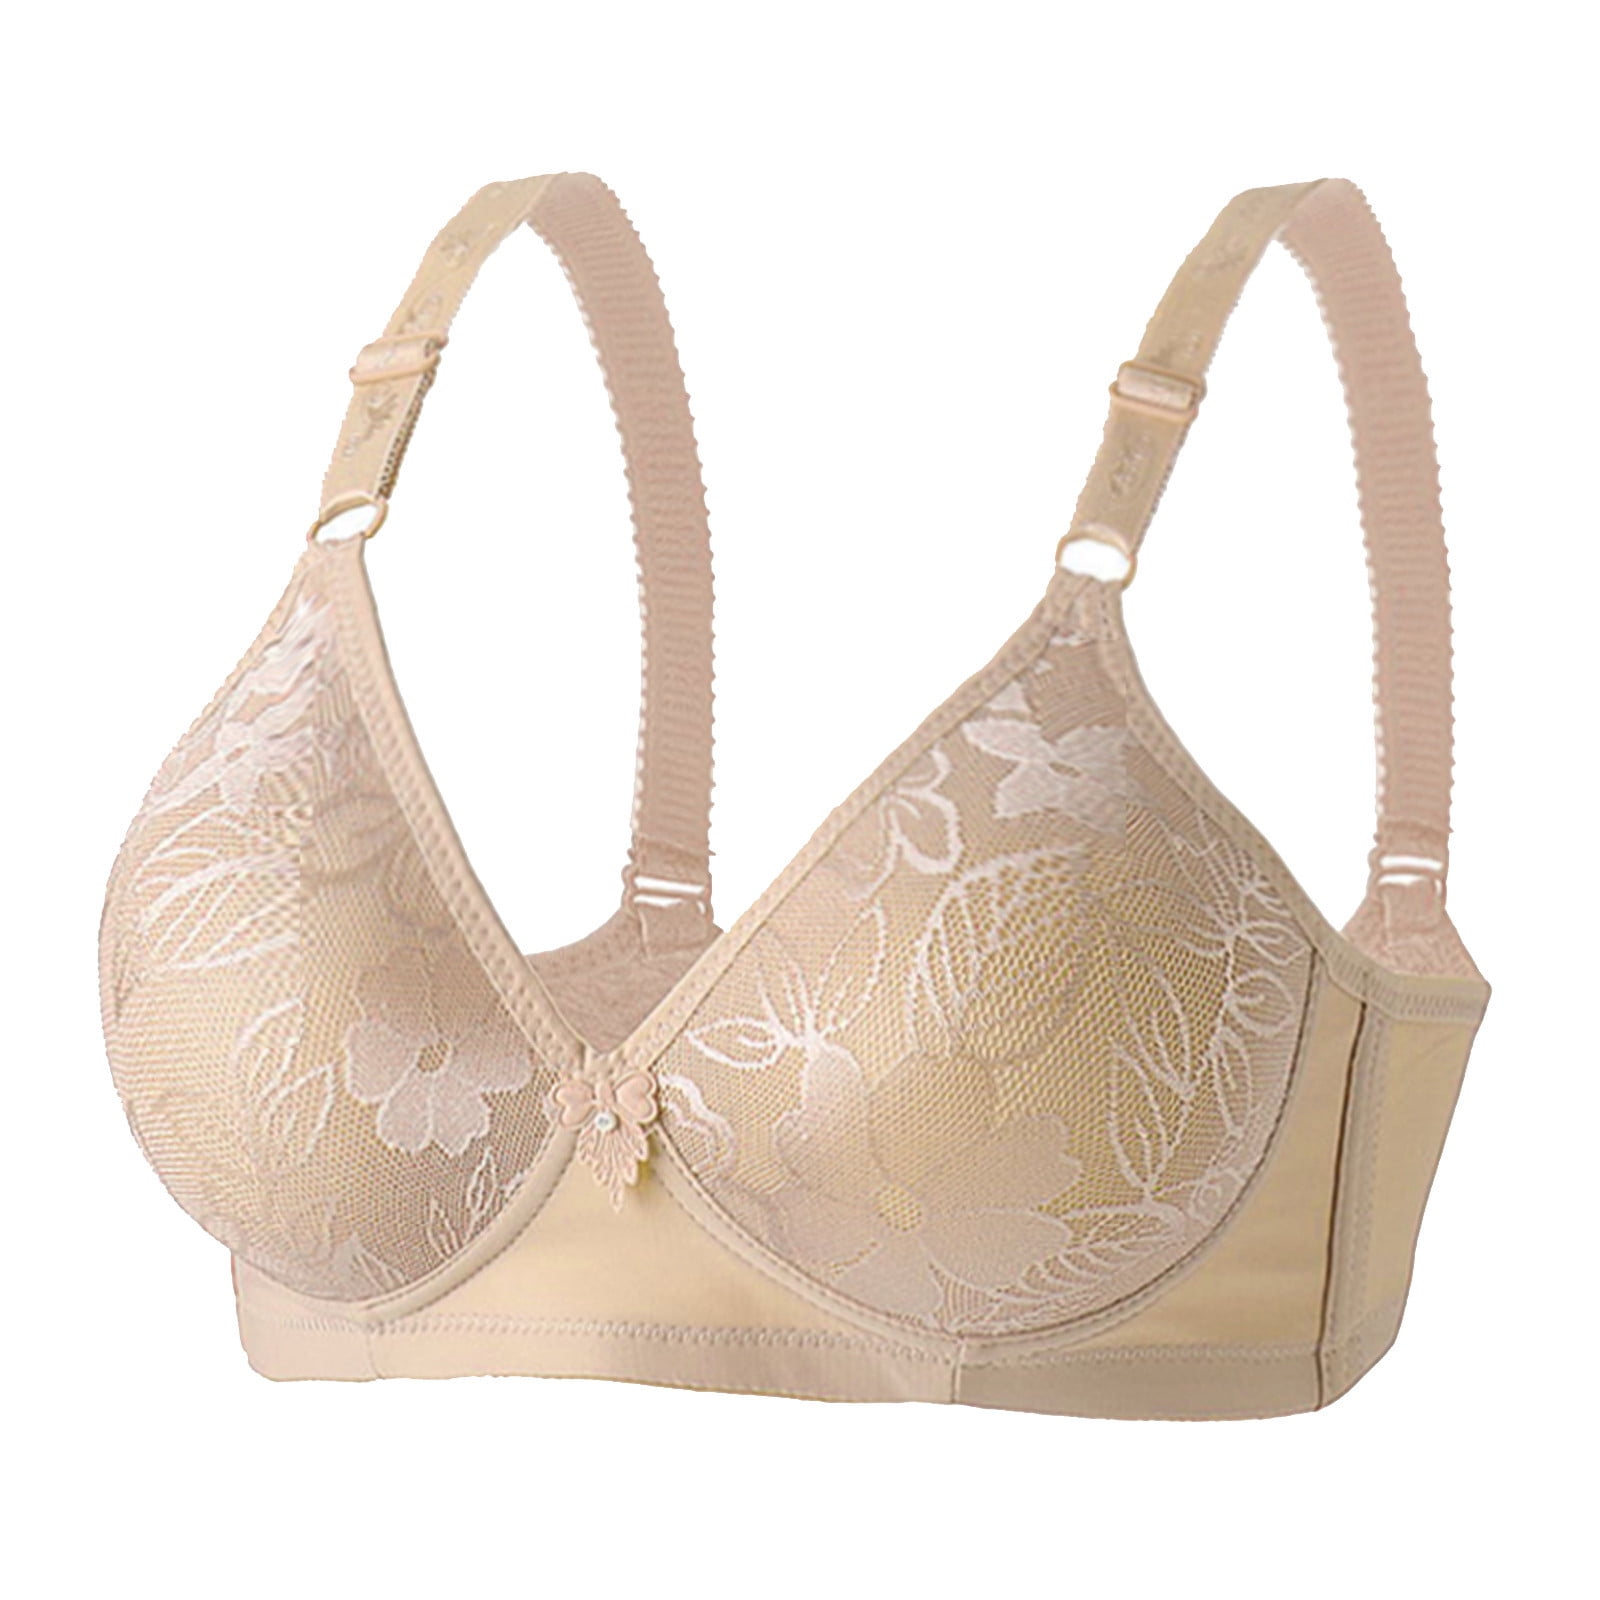 CHGBMOK Bras for Women Plue Size Adjust Full Cup No Steel Ring